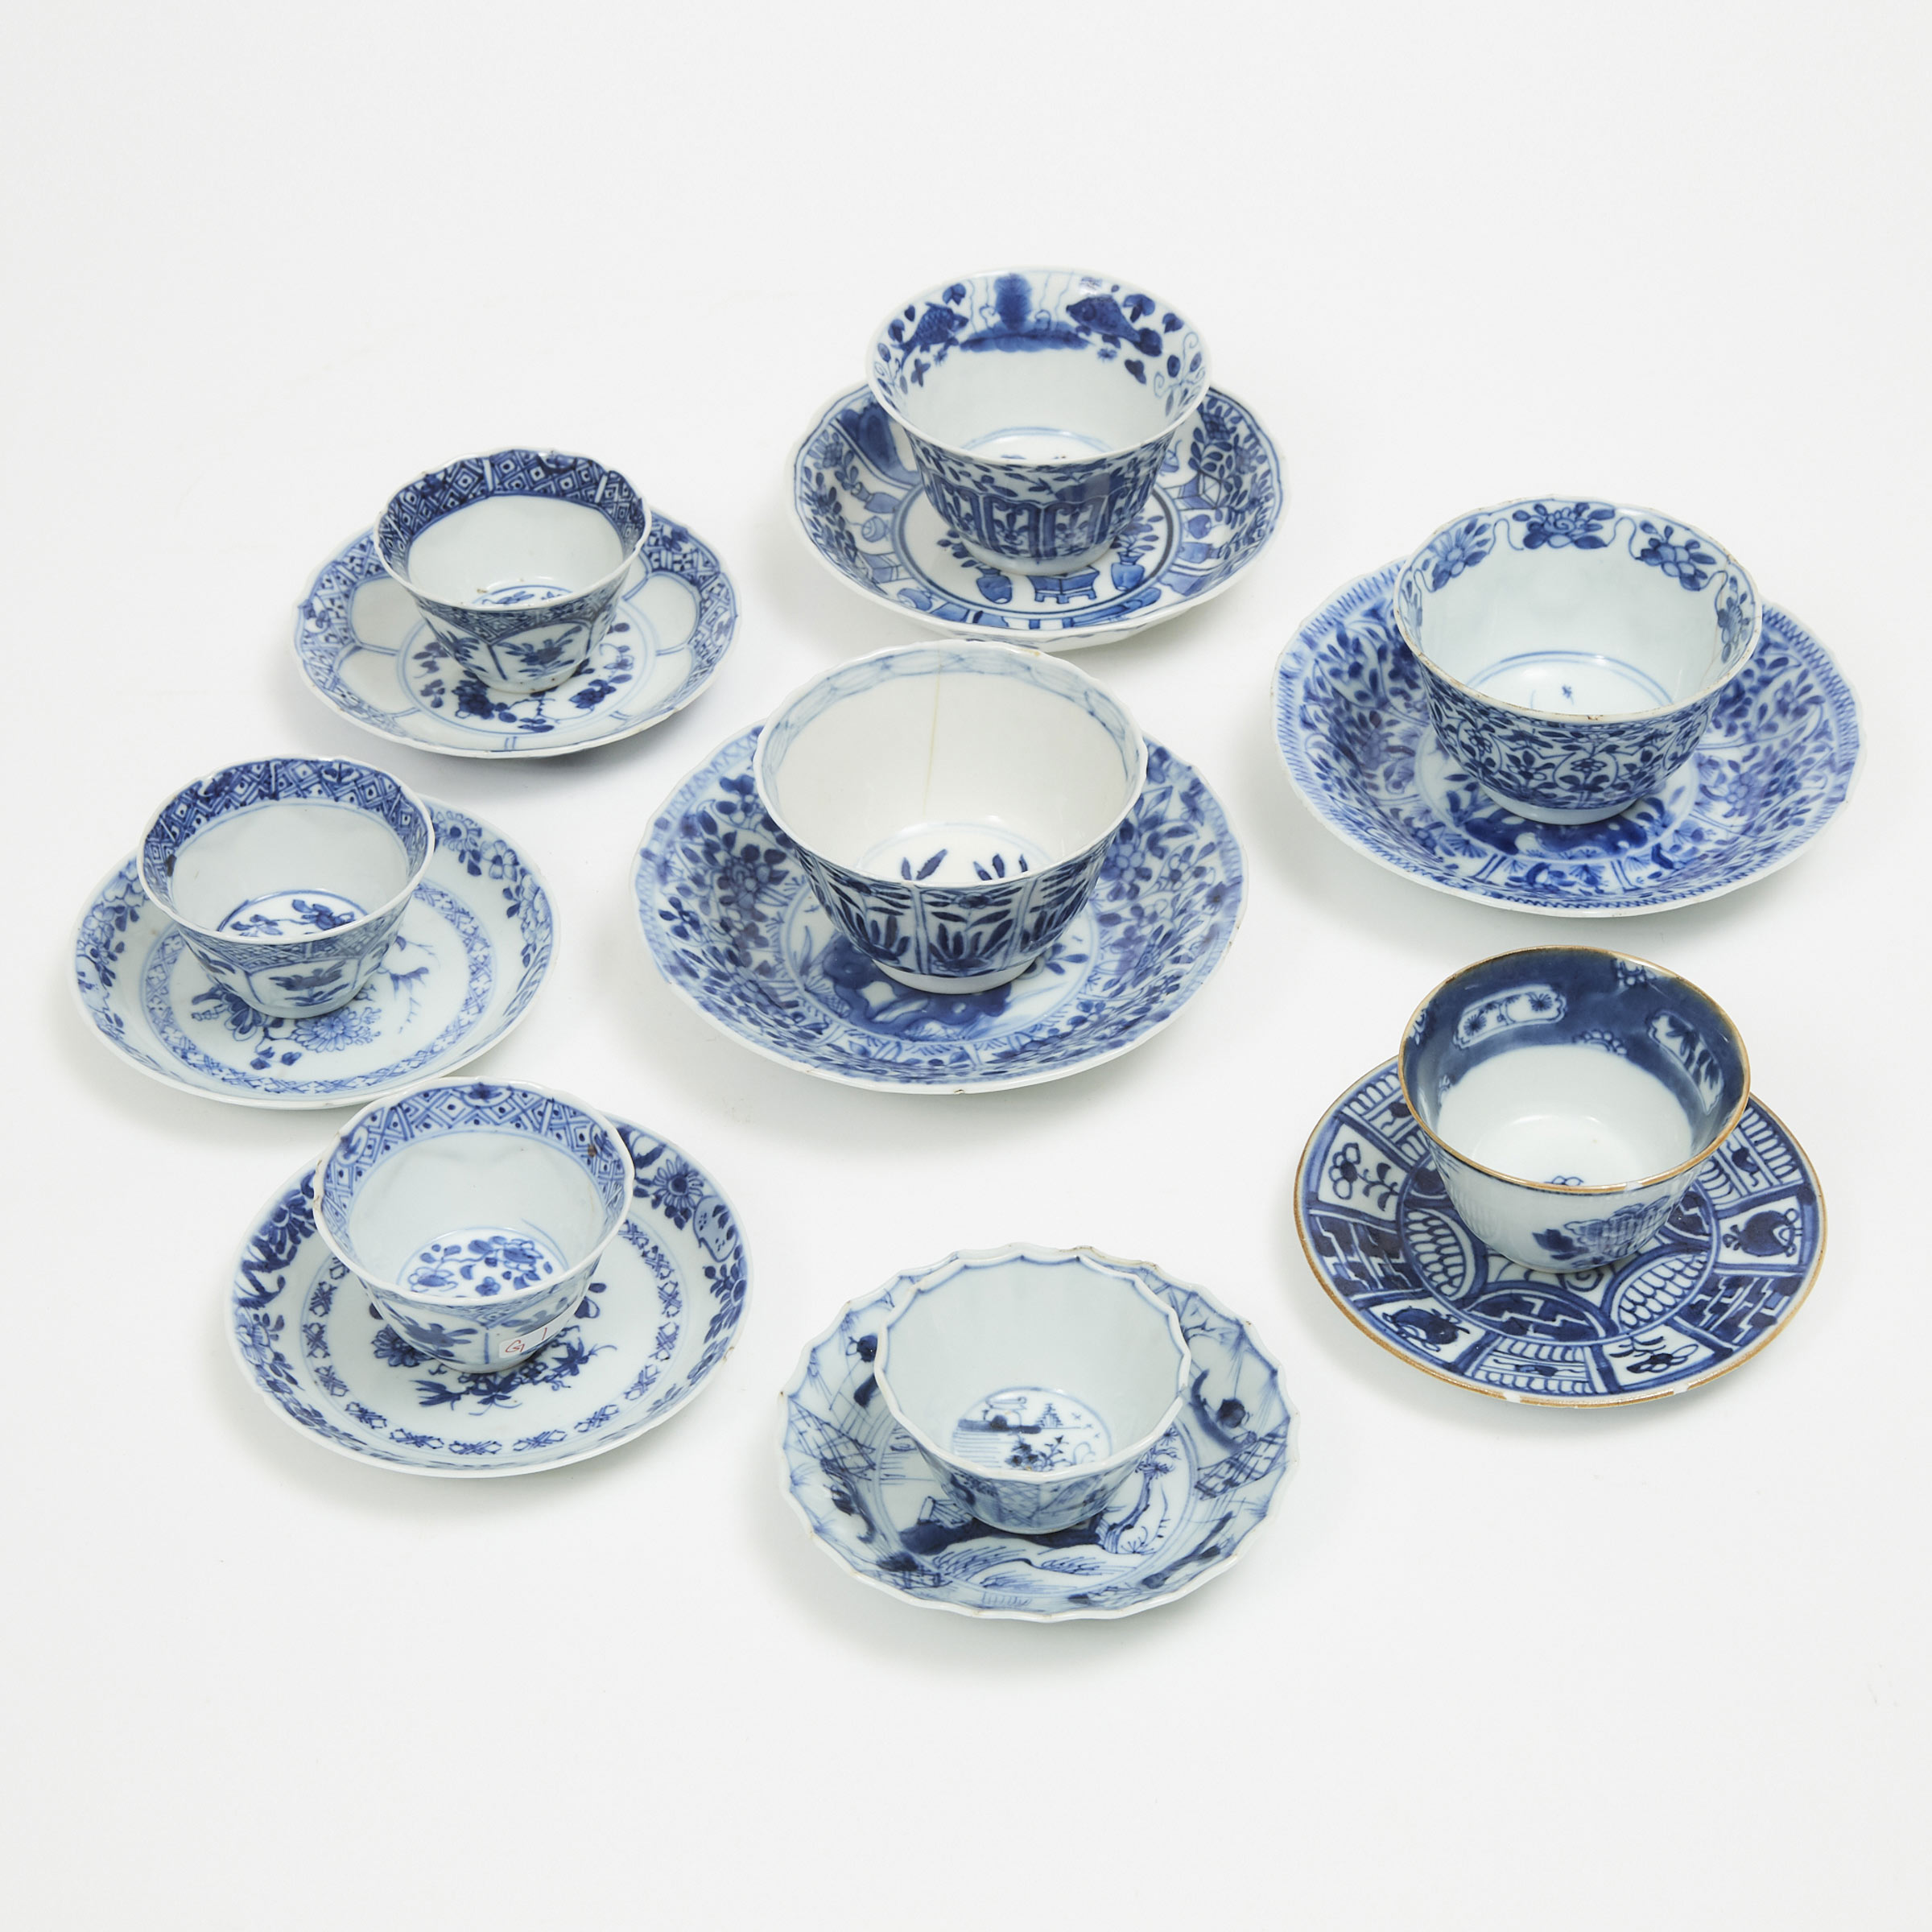 A Set of Sixteen Blue and White Teawares, 19th Century